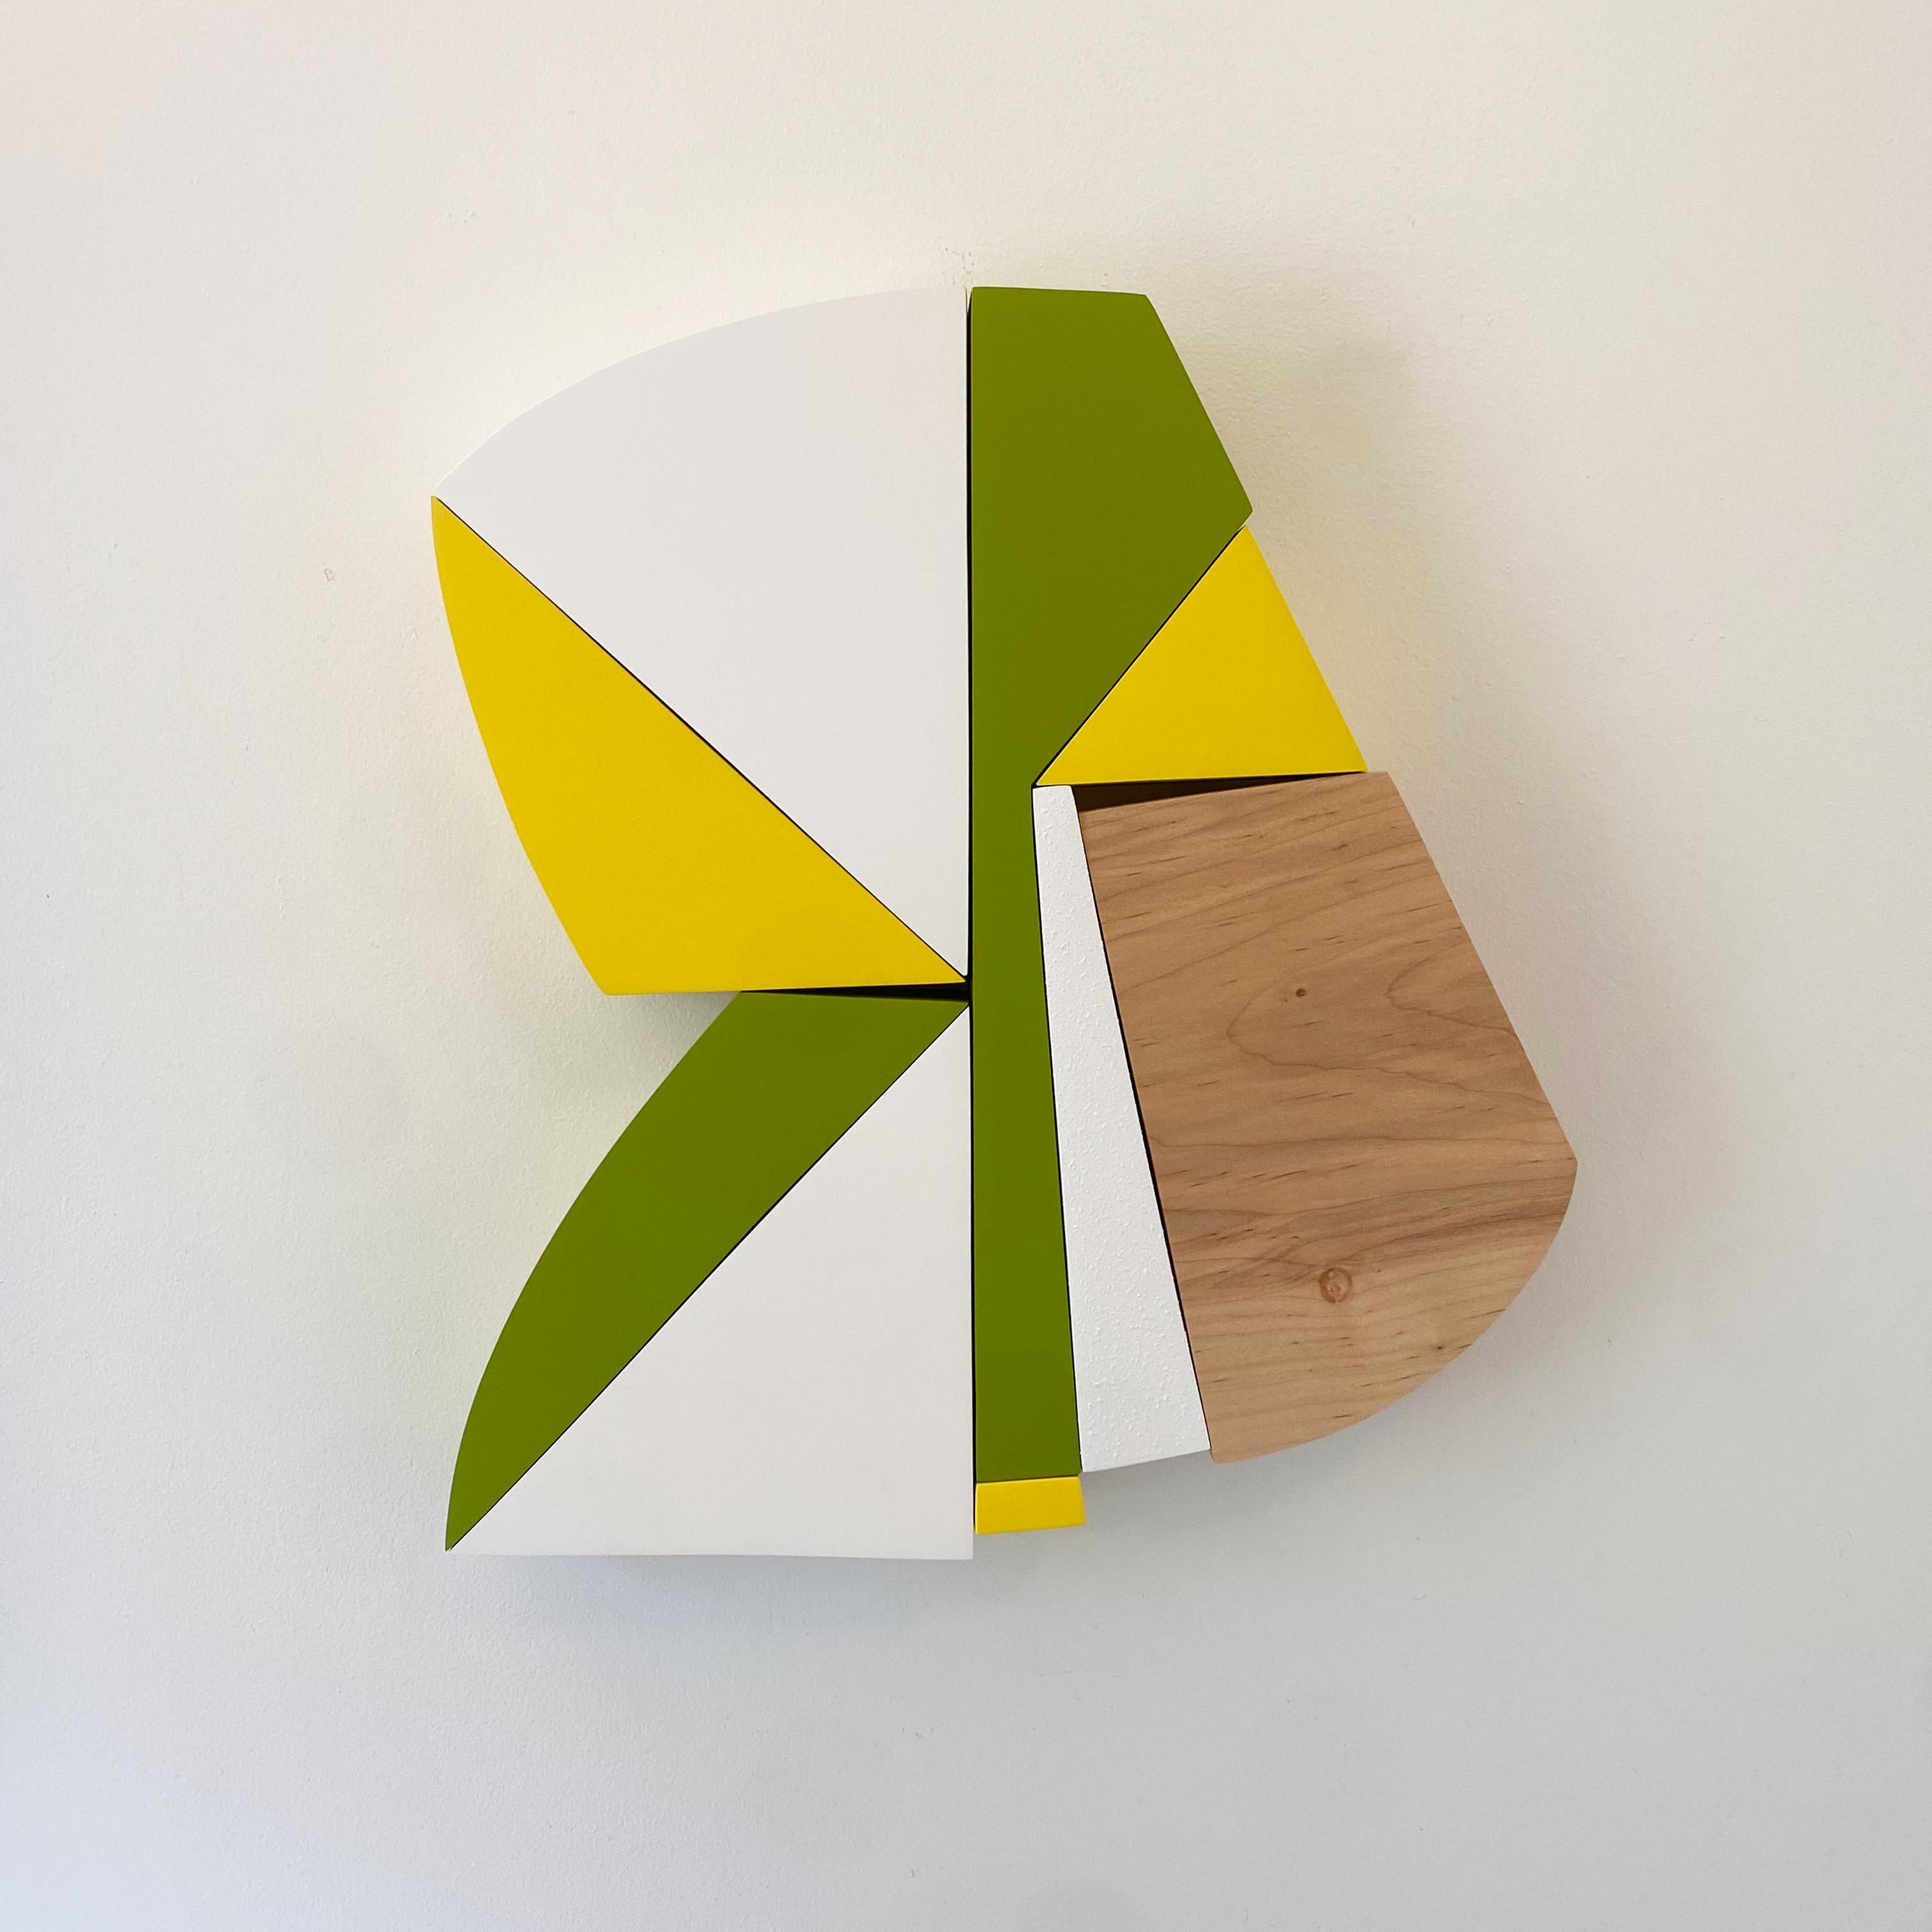 "Refresher" Wall Sculpture mid century modern, green, yellow, mcm, wood, white - Mixed Media Art by Scott Troxel